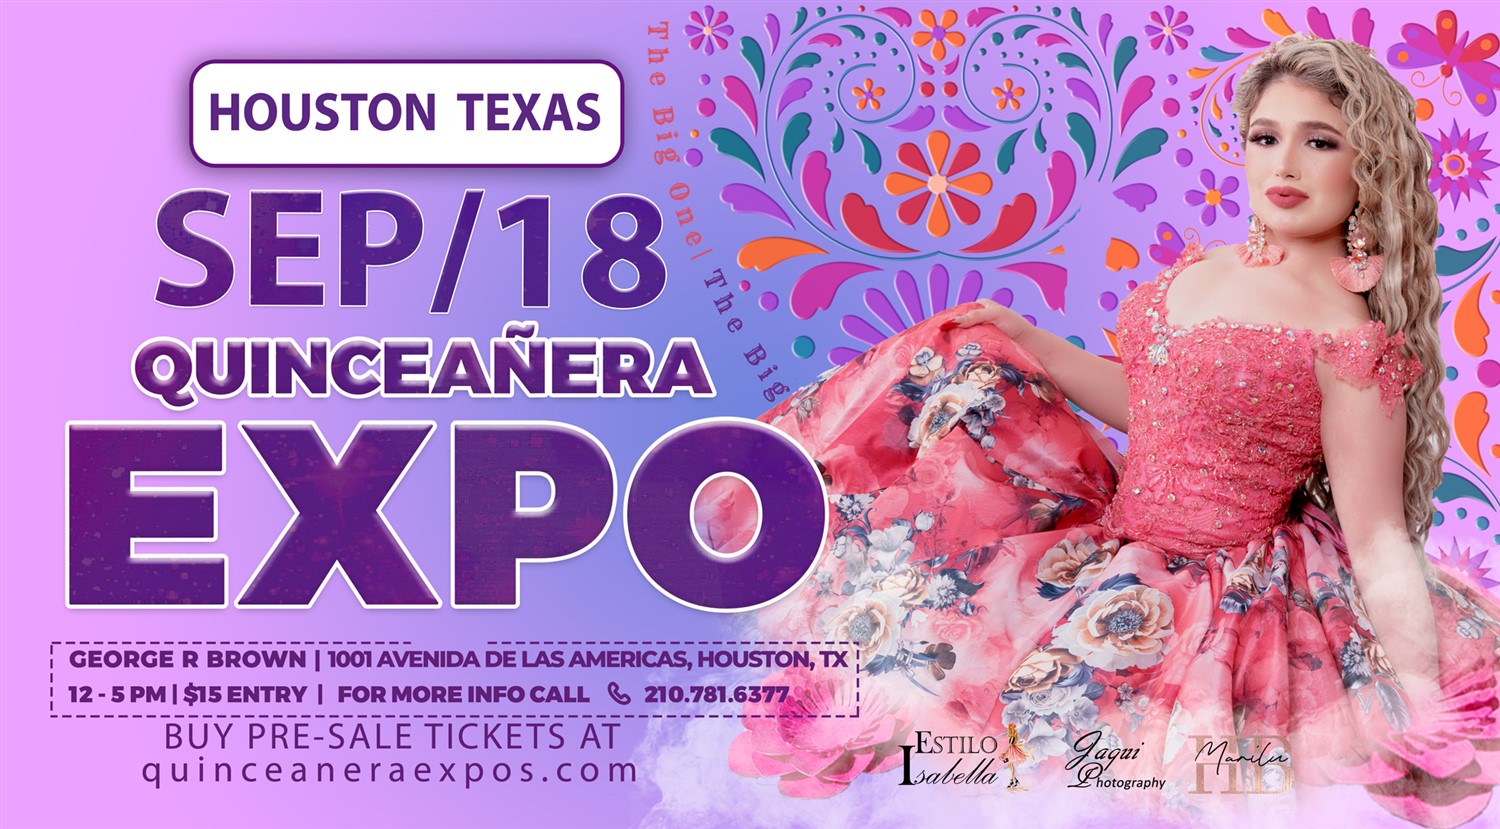 Quinceanera Expo Houston 09-18-2022 12-5pm at George R. Brown  on Sep 18, 12:00@George R. Brown Convention Center - Buy tickets and Get information on Quinceanera Expo 